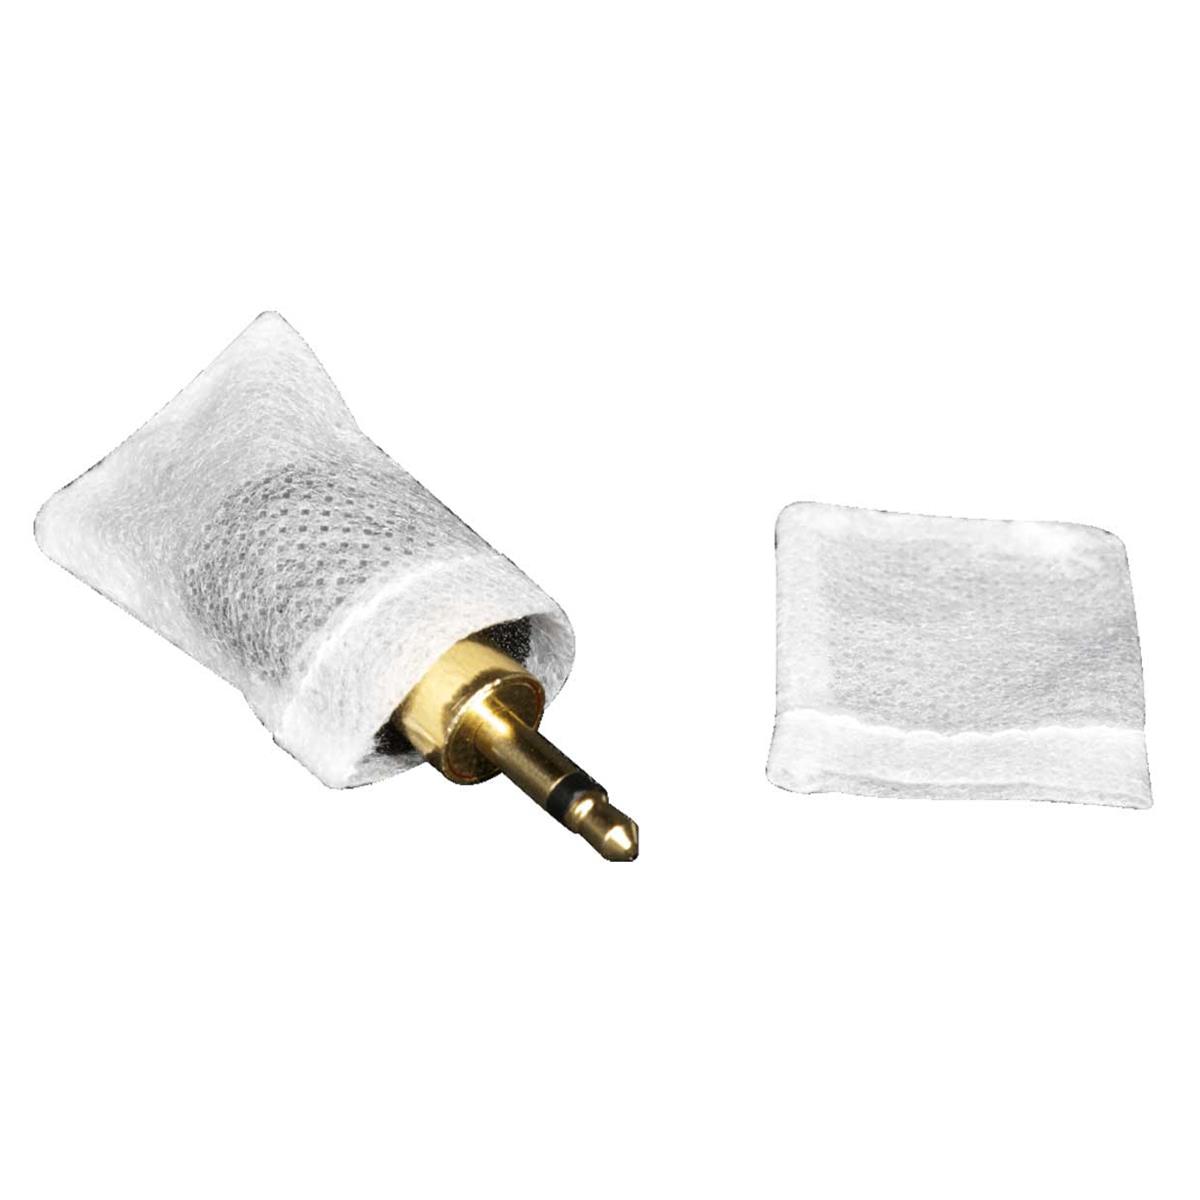 Williams Sound Sanitary Cover for Mic 014/Mic 044 Microphones, 100 Pack -  WND 012